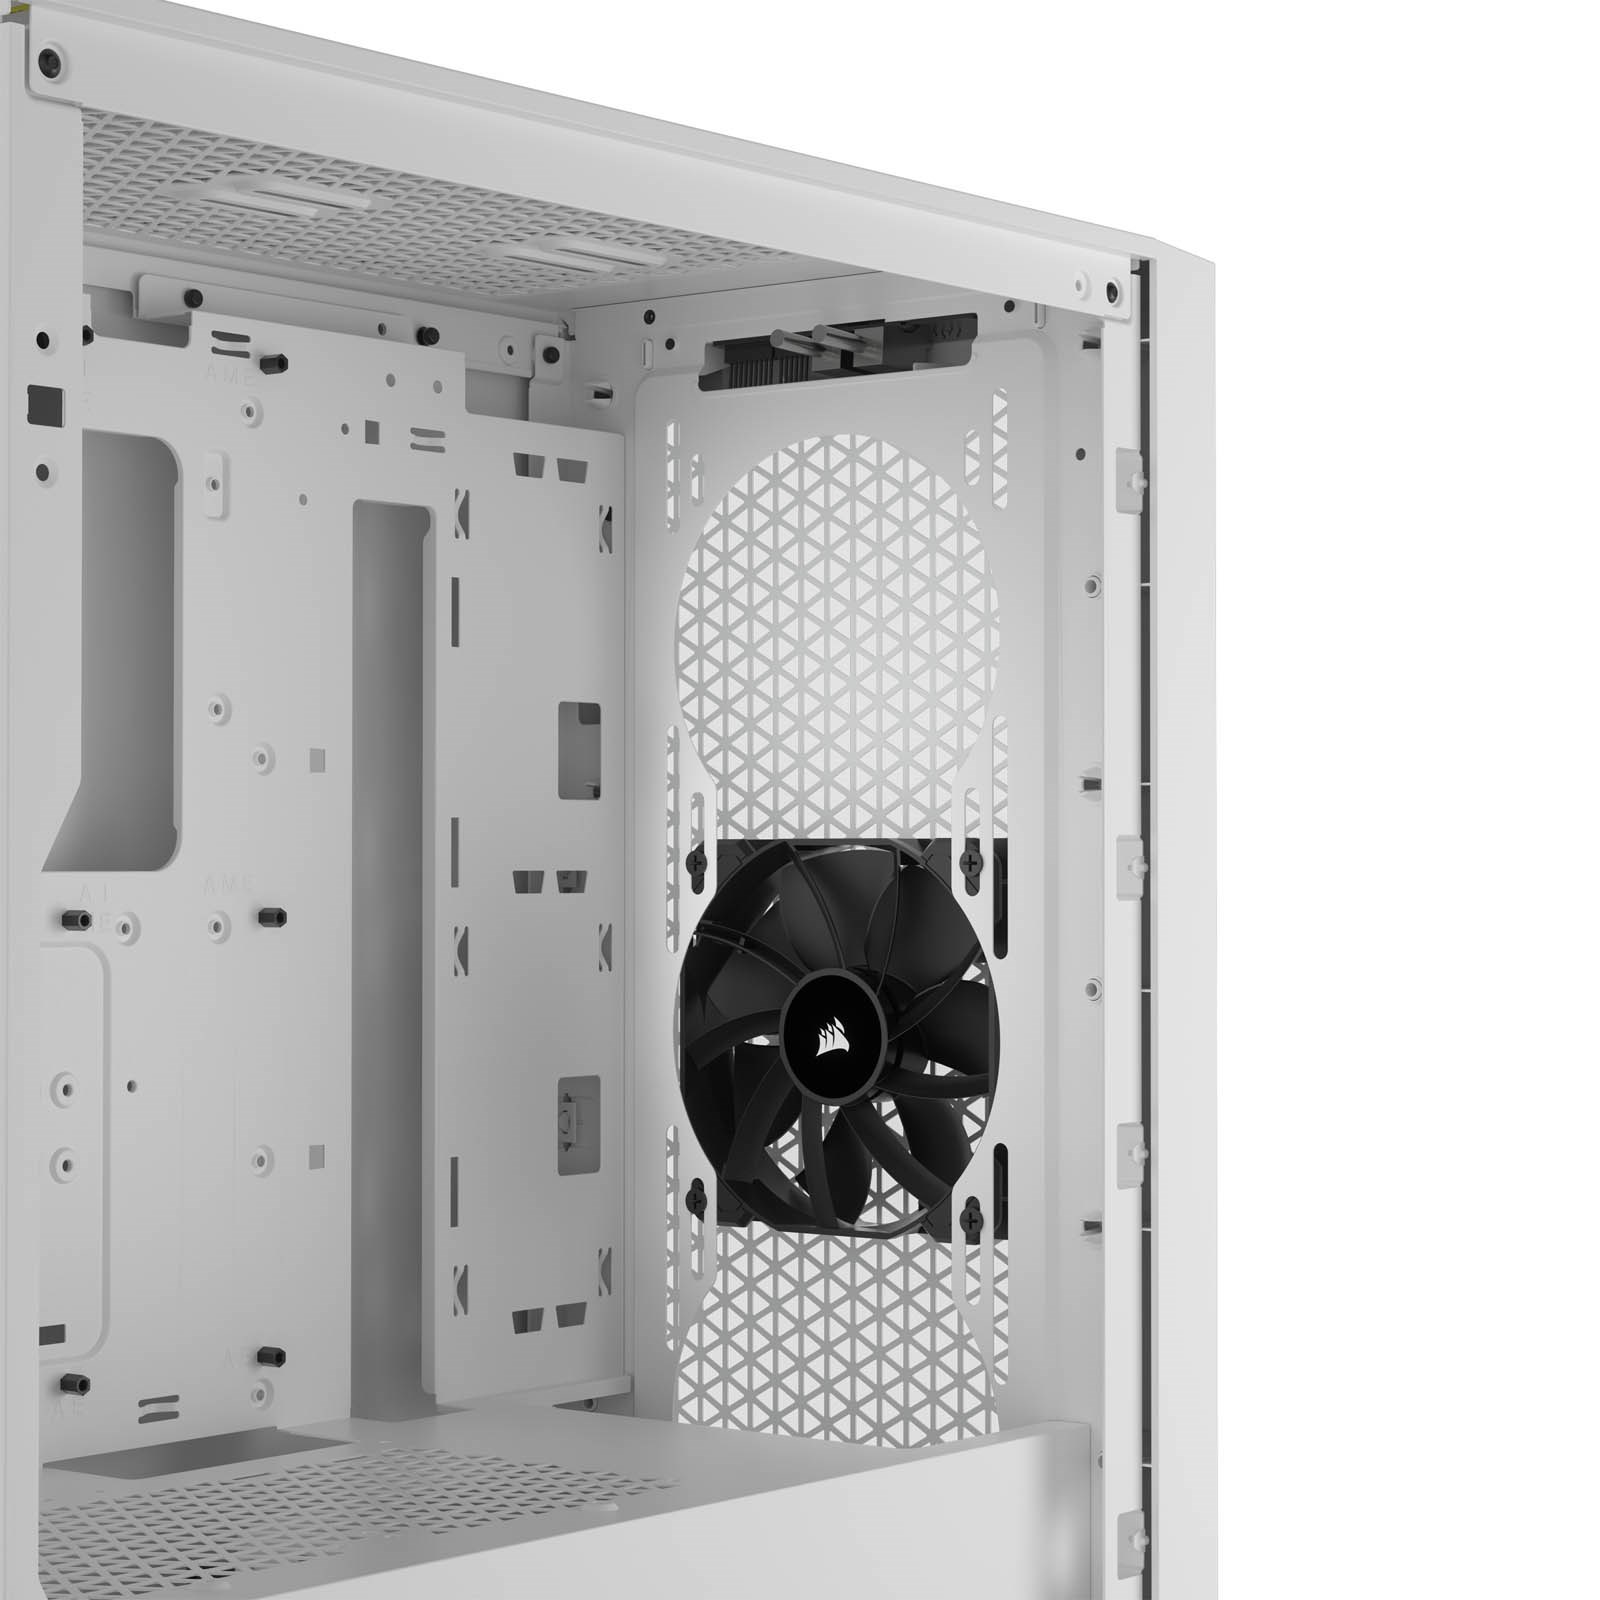 Corsair 3000D AIRFLOW Mid-Tower PC Case – 3-Pin Fans – Four-Slot GPU  Support – Fits up to 8x 120mm Fans – High-Airflow Design – White :  Electronics 